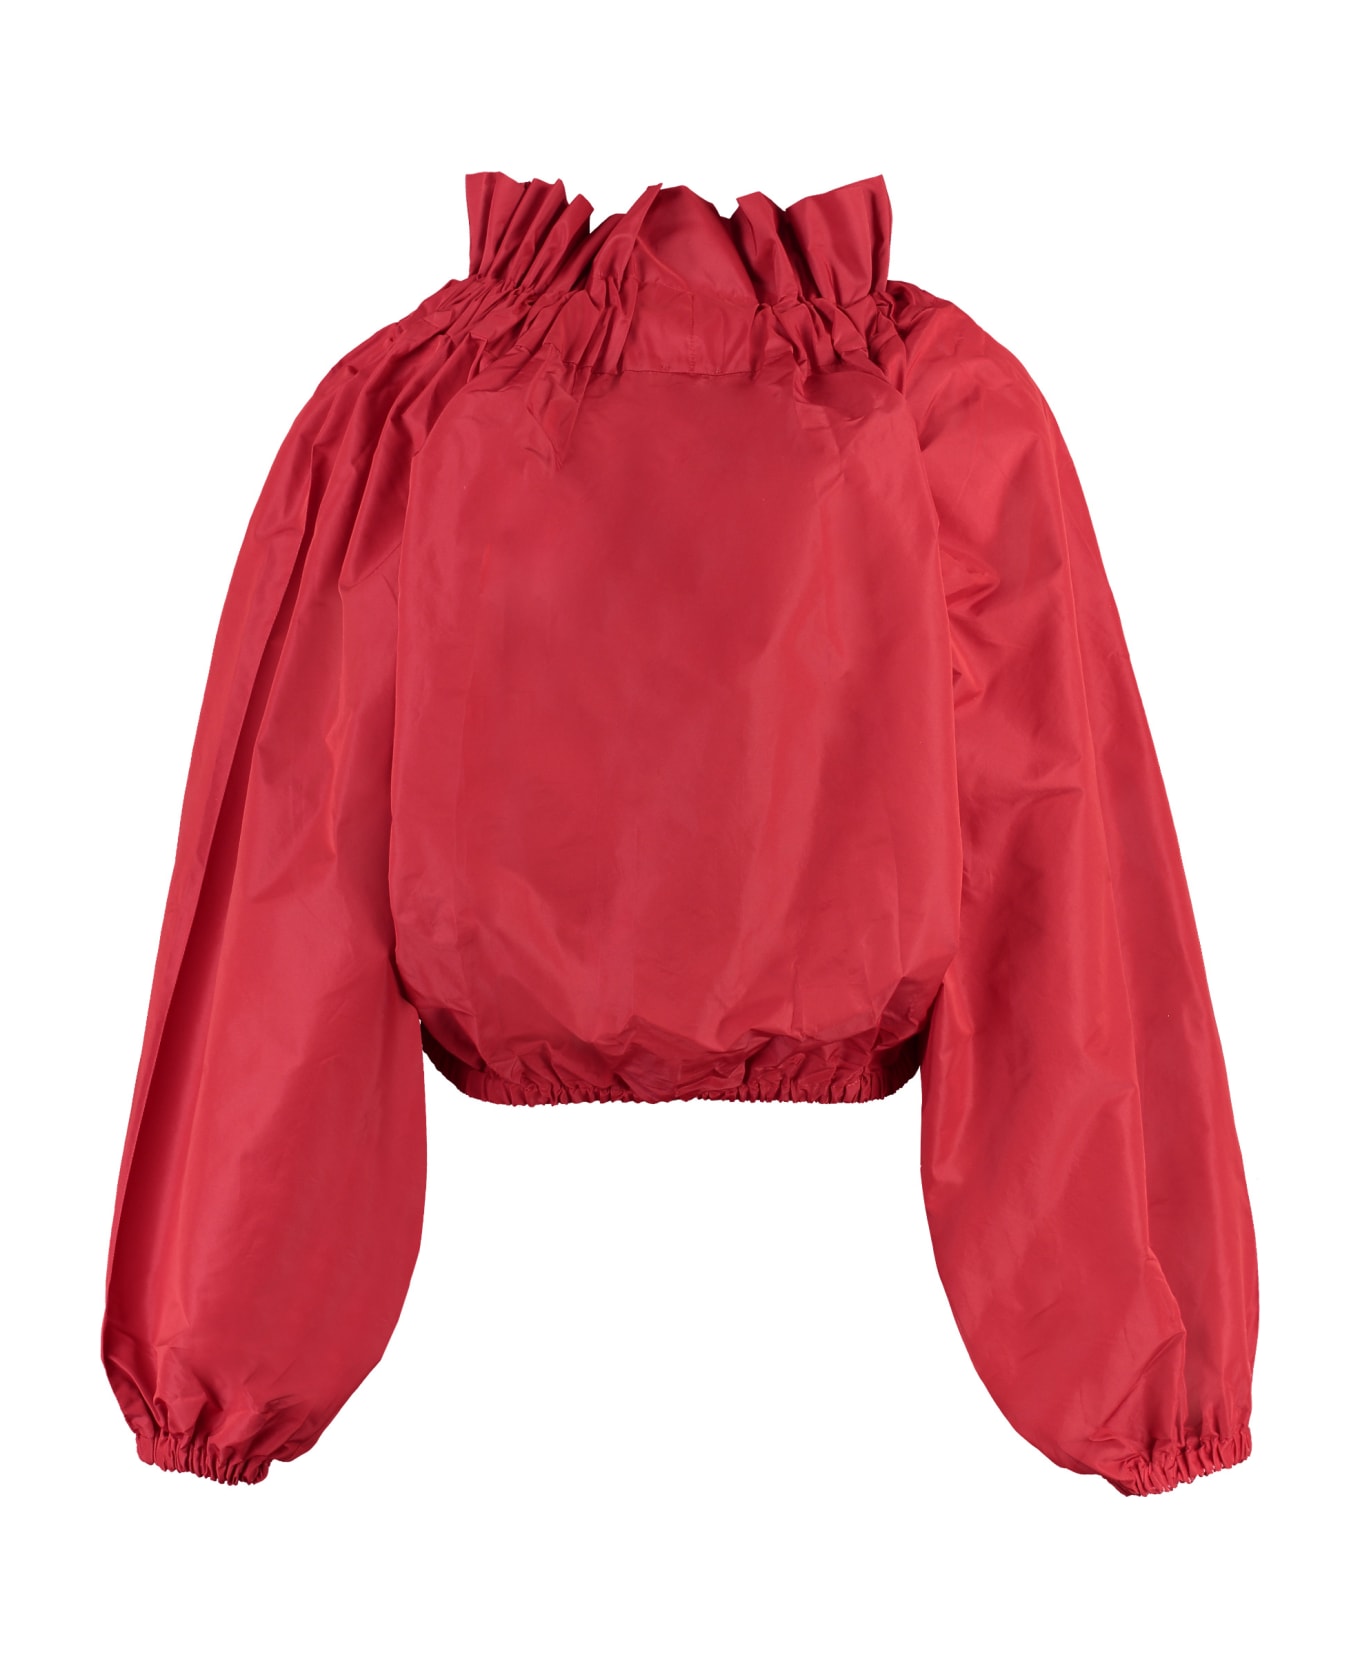 Patou Ruffled Cotton Blouse - red